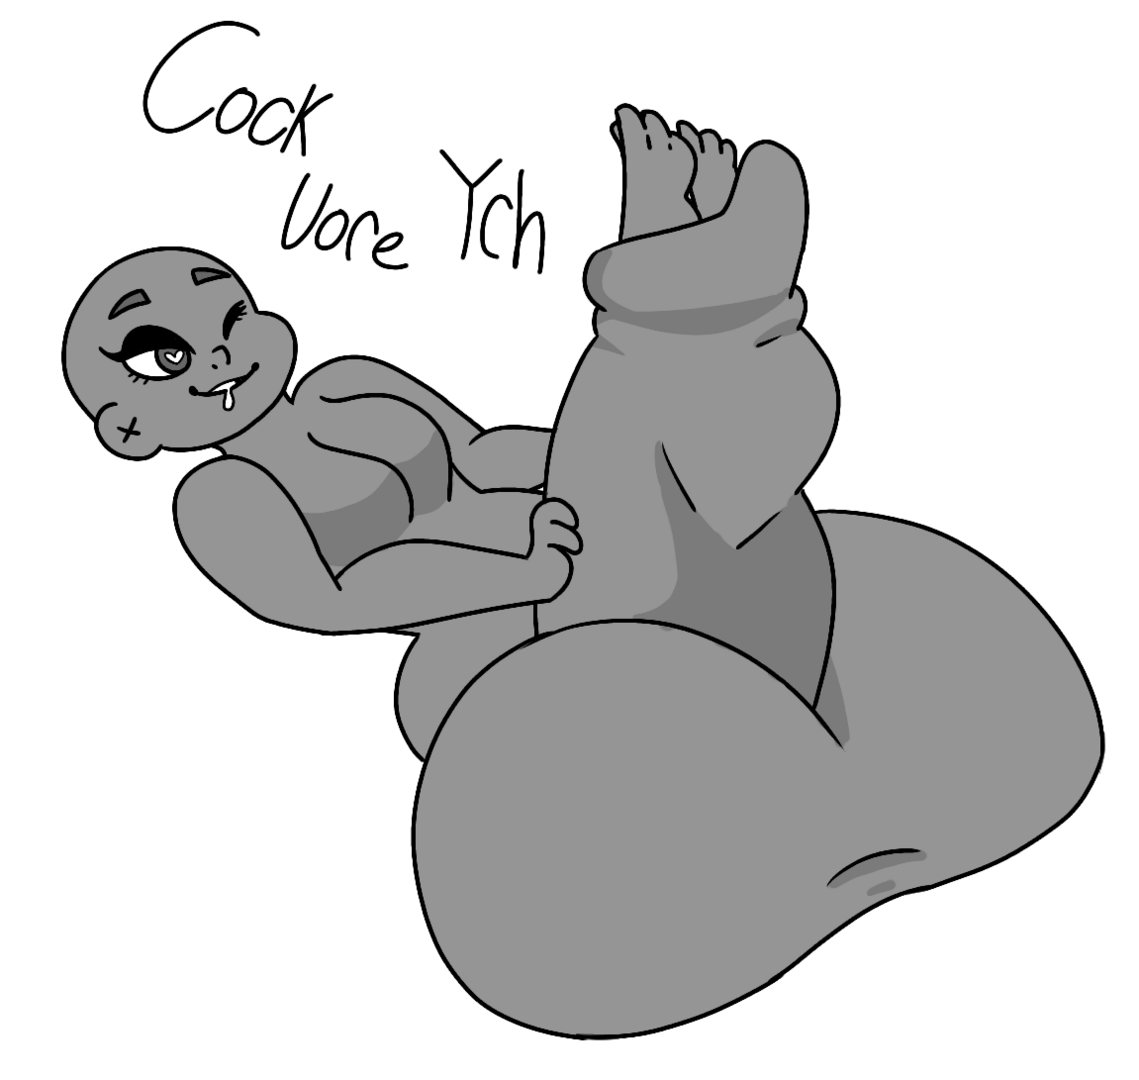 Cock Vore YCH - YCH.art.